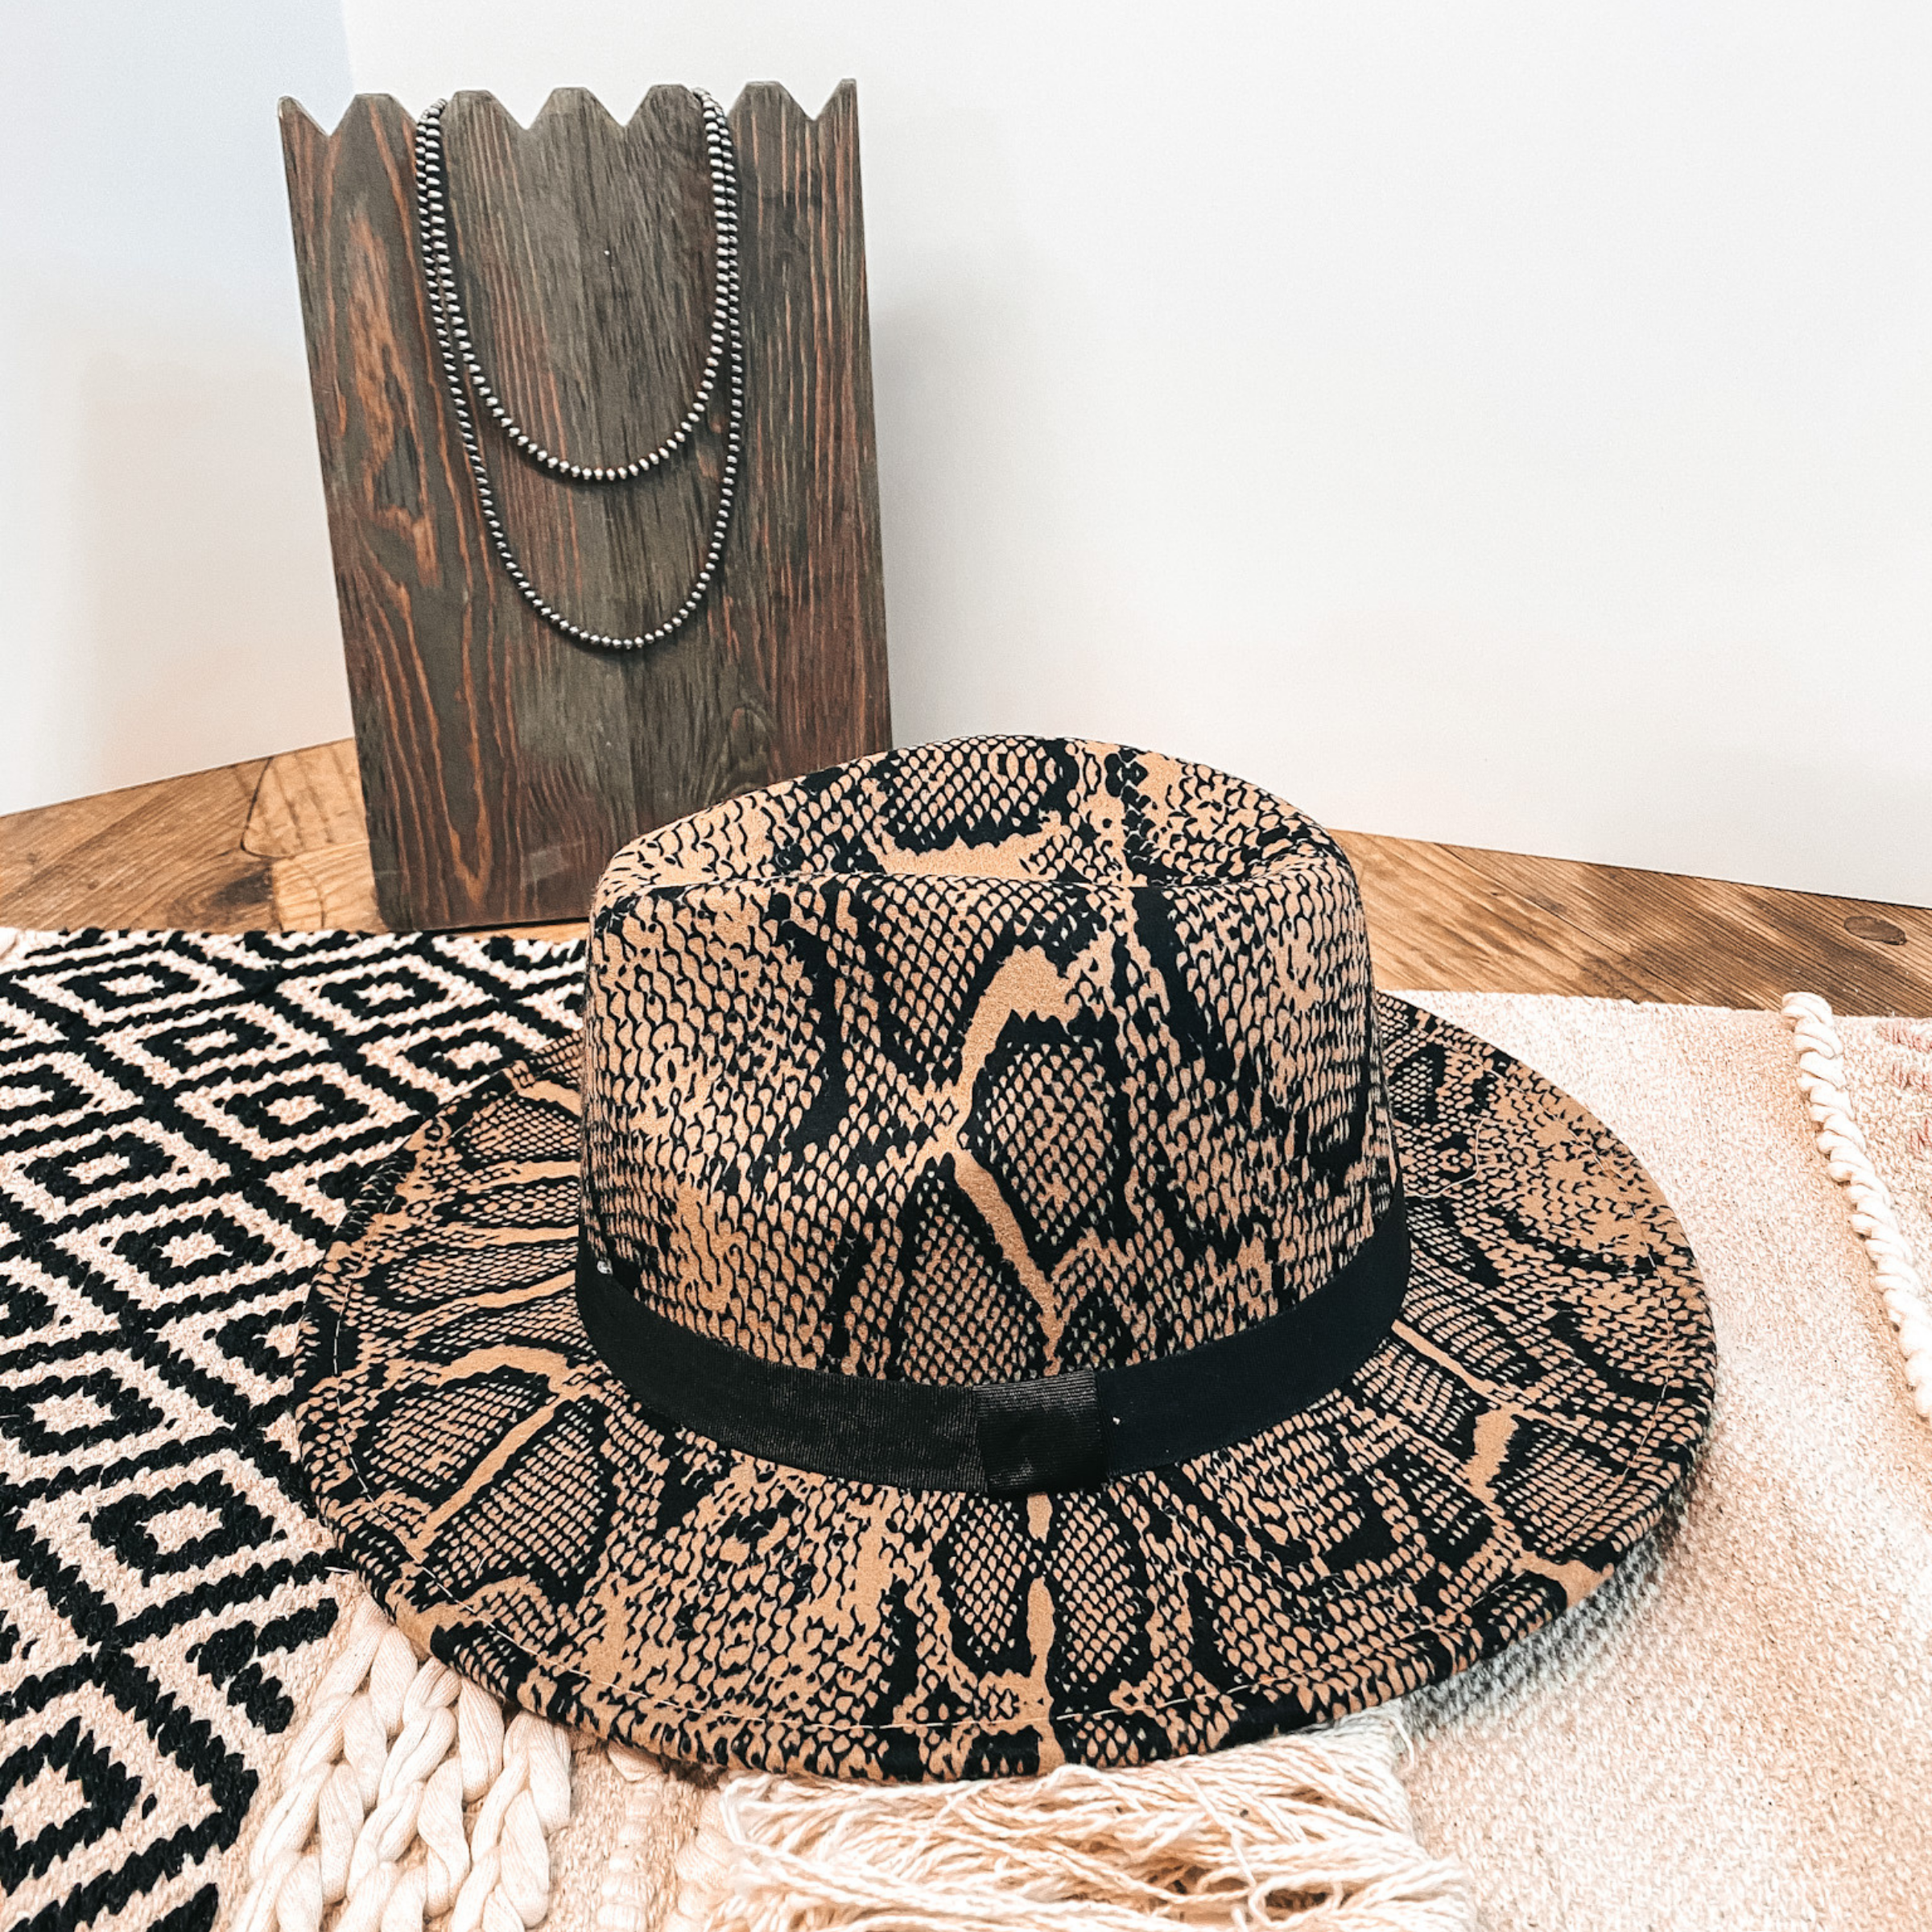 Wild Adventure Flat Brim Hat in Snake Print - Giddy Up Glamour Boutique